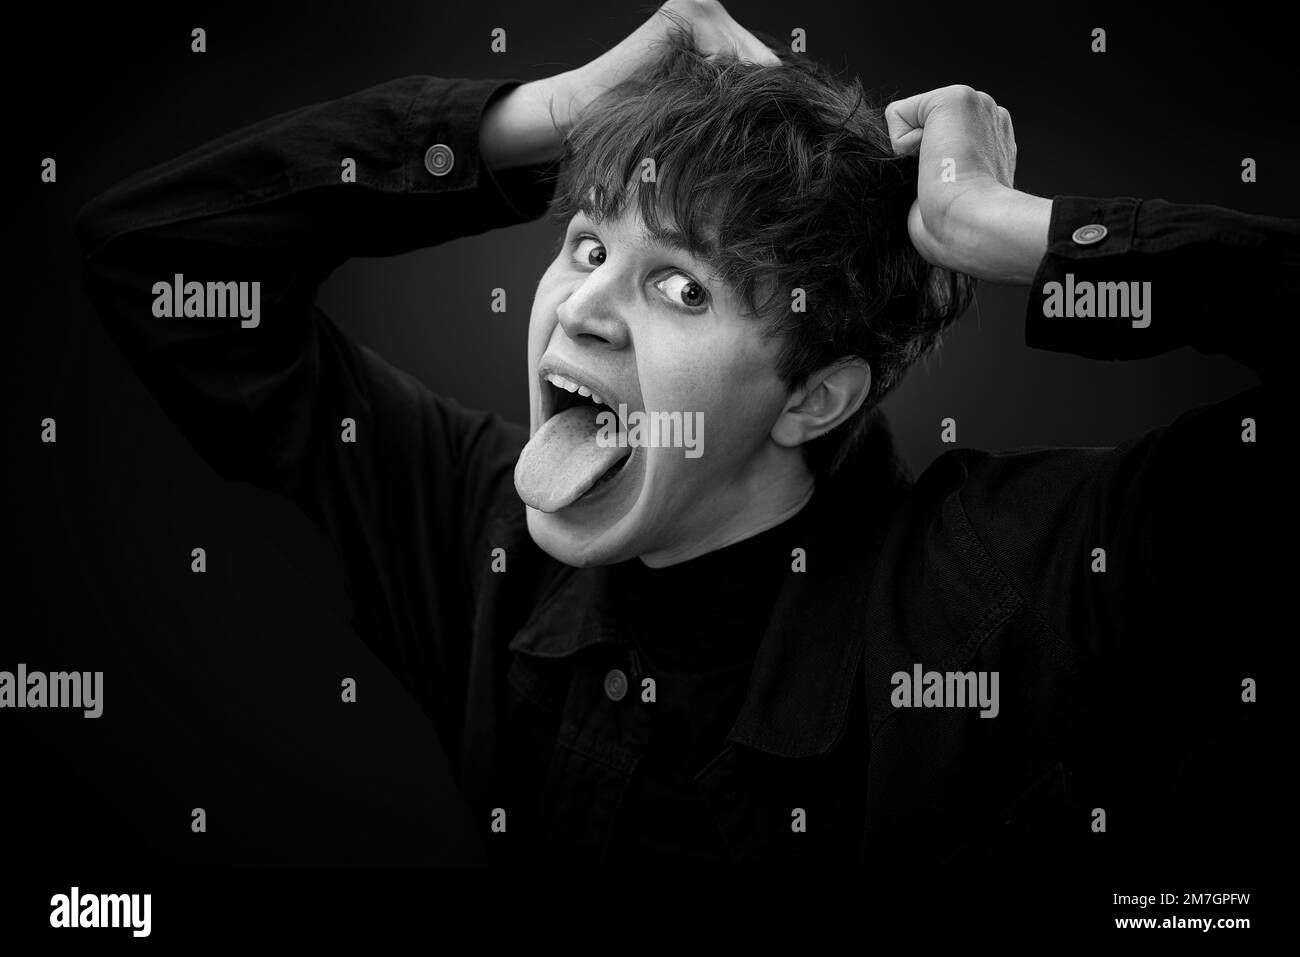 portrait of crazy young man showing the tongue. Stock Photo